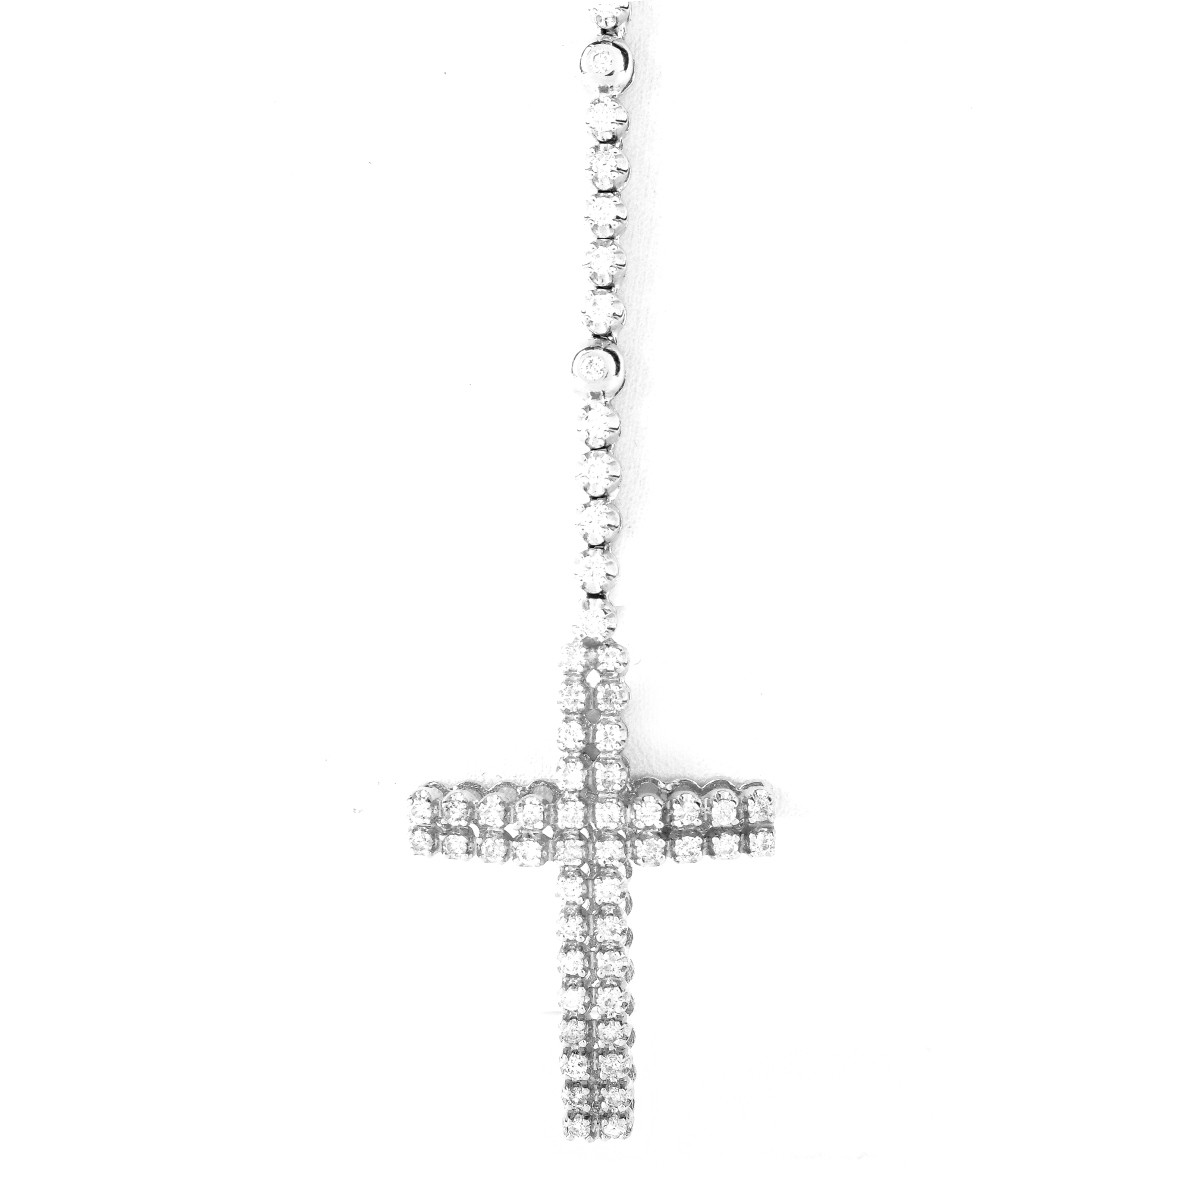 12.75ct Diamond and 18K Gold Cross Necklace